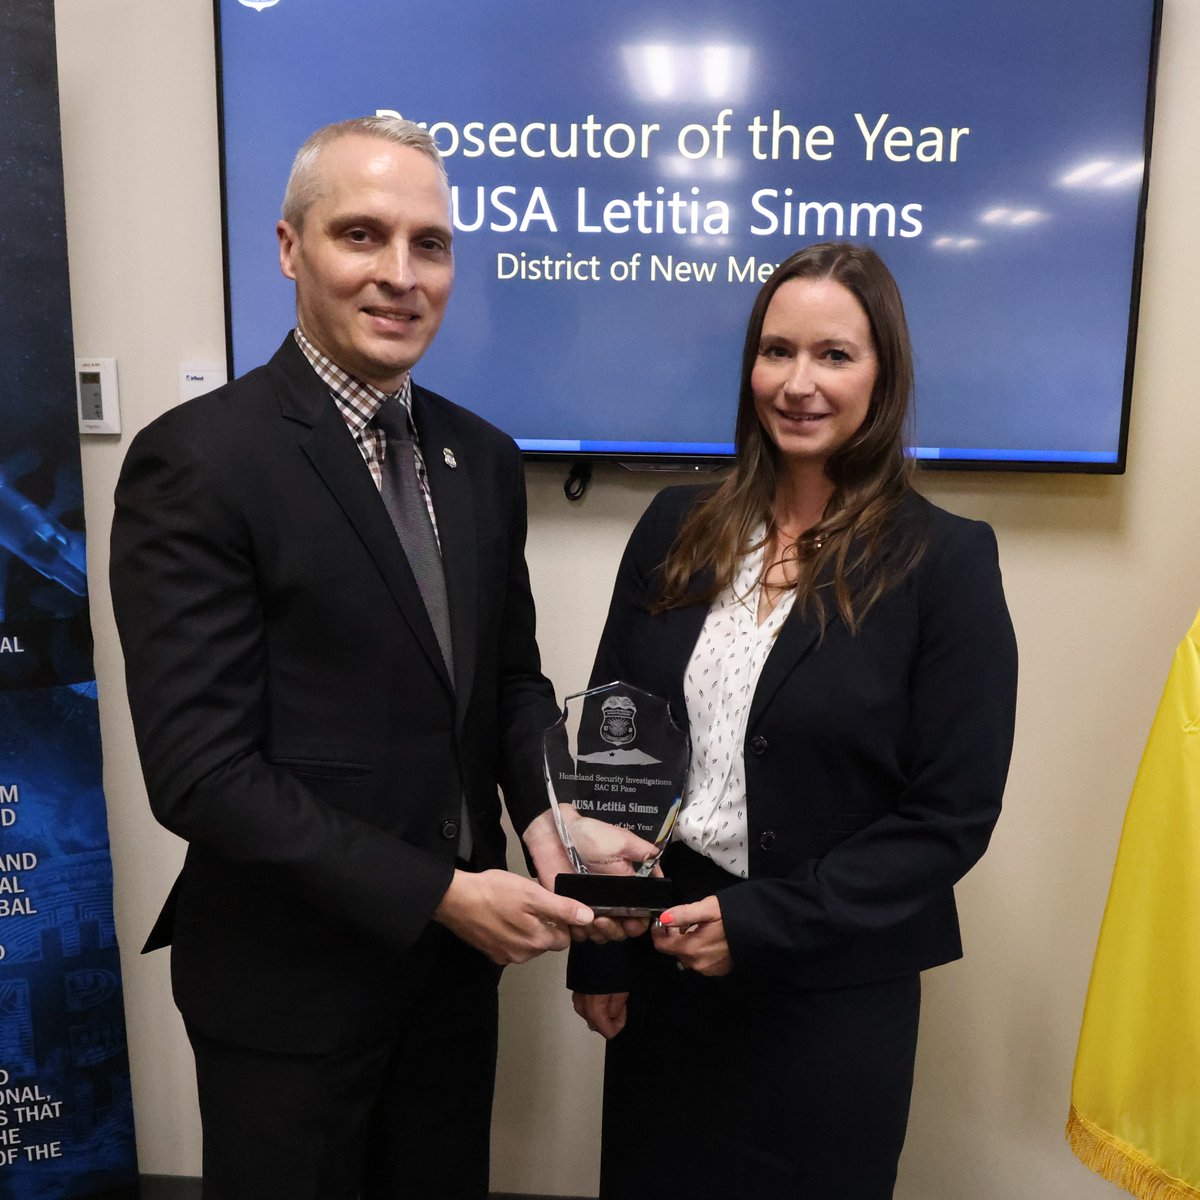 This week, AUSA Letitia Simms was recognized as Prosecutor of the Year by @HSIElPaso. We are immensely proud of AUSA Simms' outstanding work in prosecuting critical cases that safeguard our nation's interests. Please join us in congratulating her on this well-deserved recognition